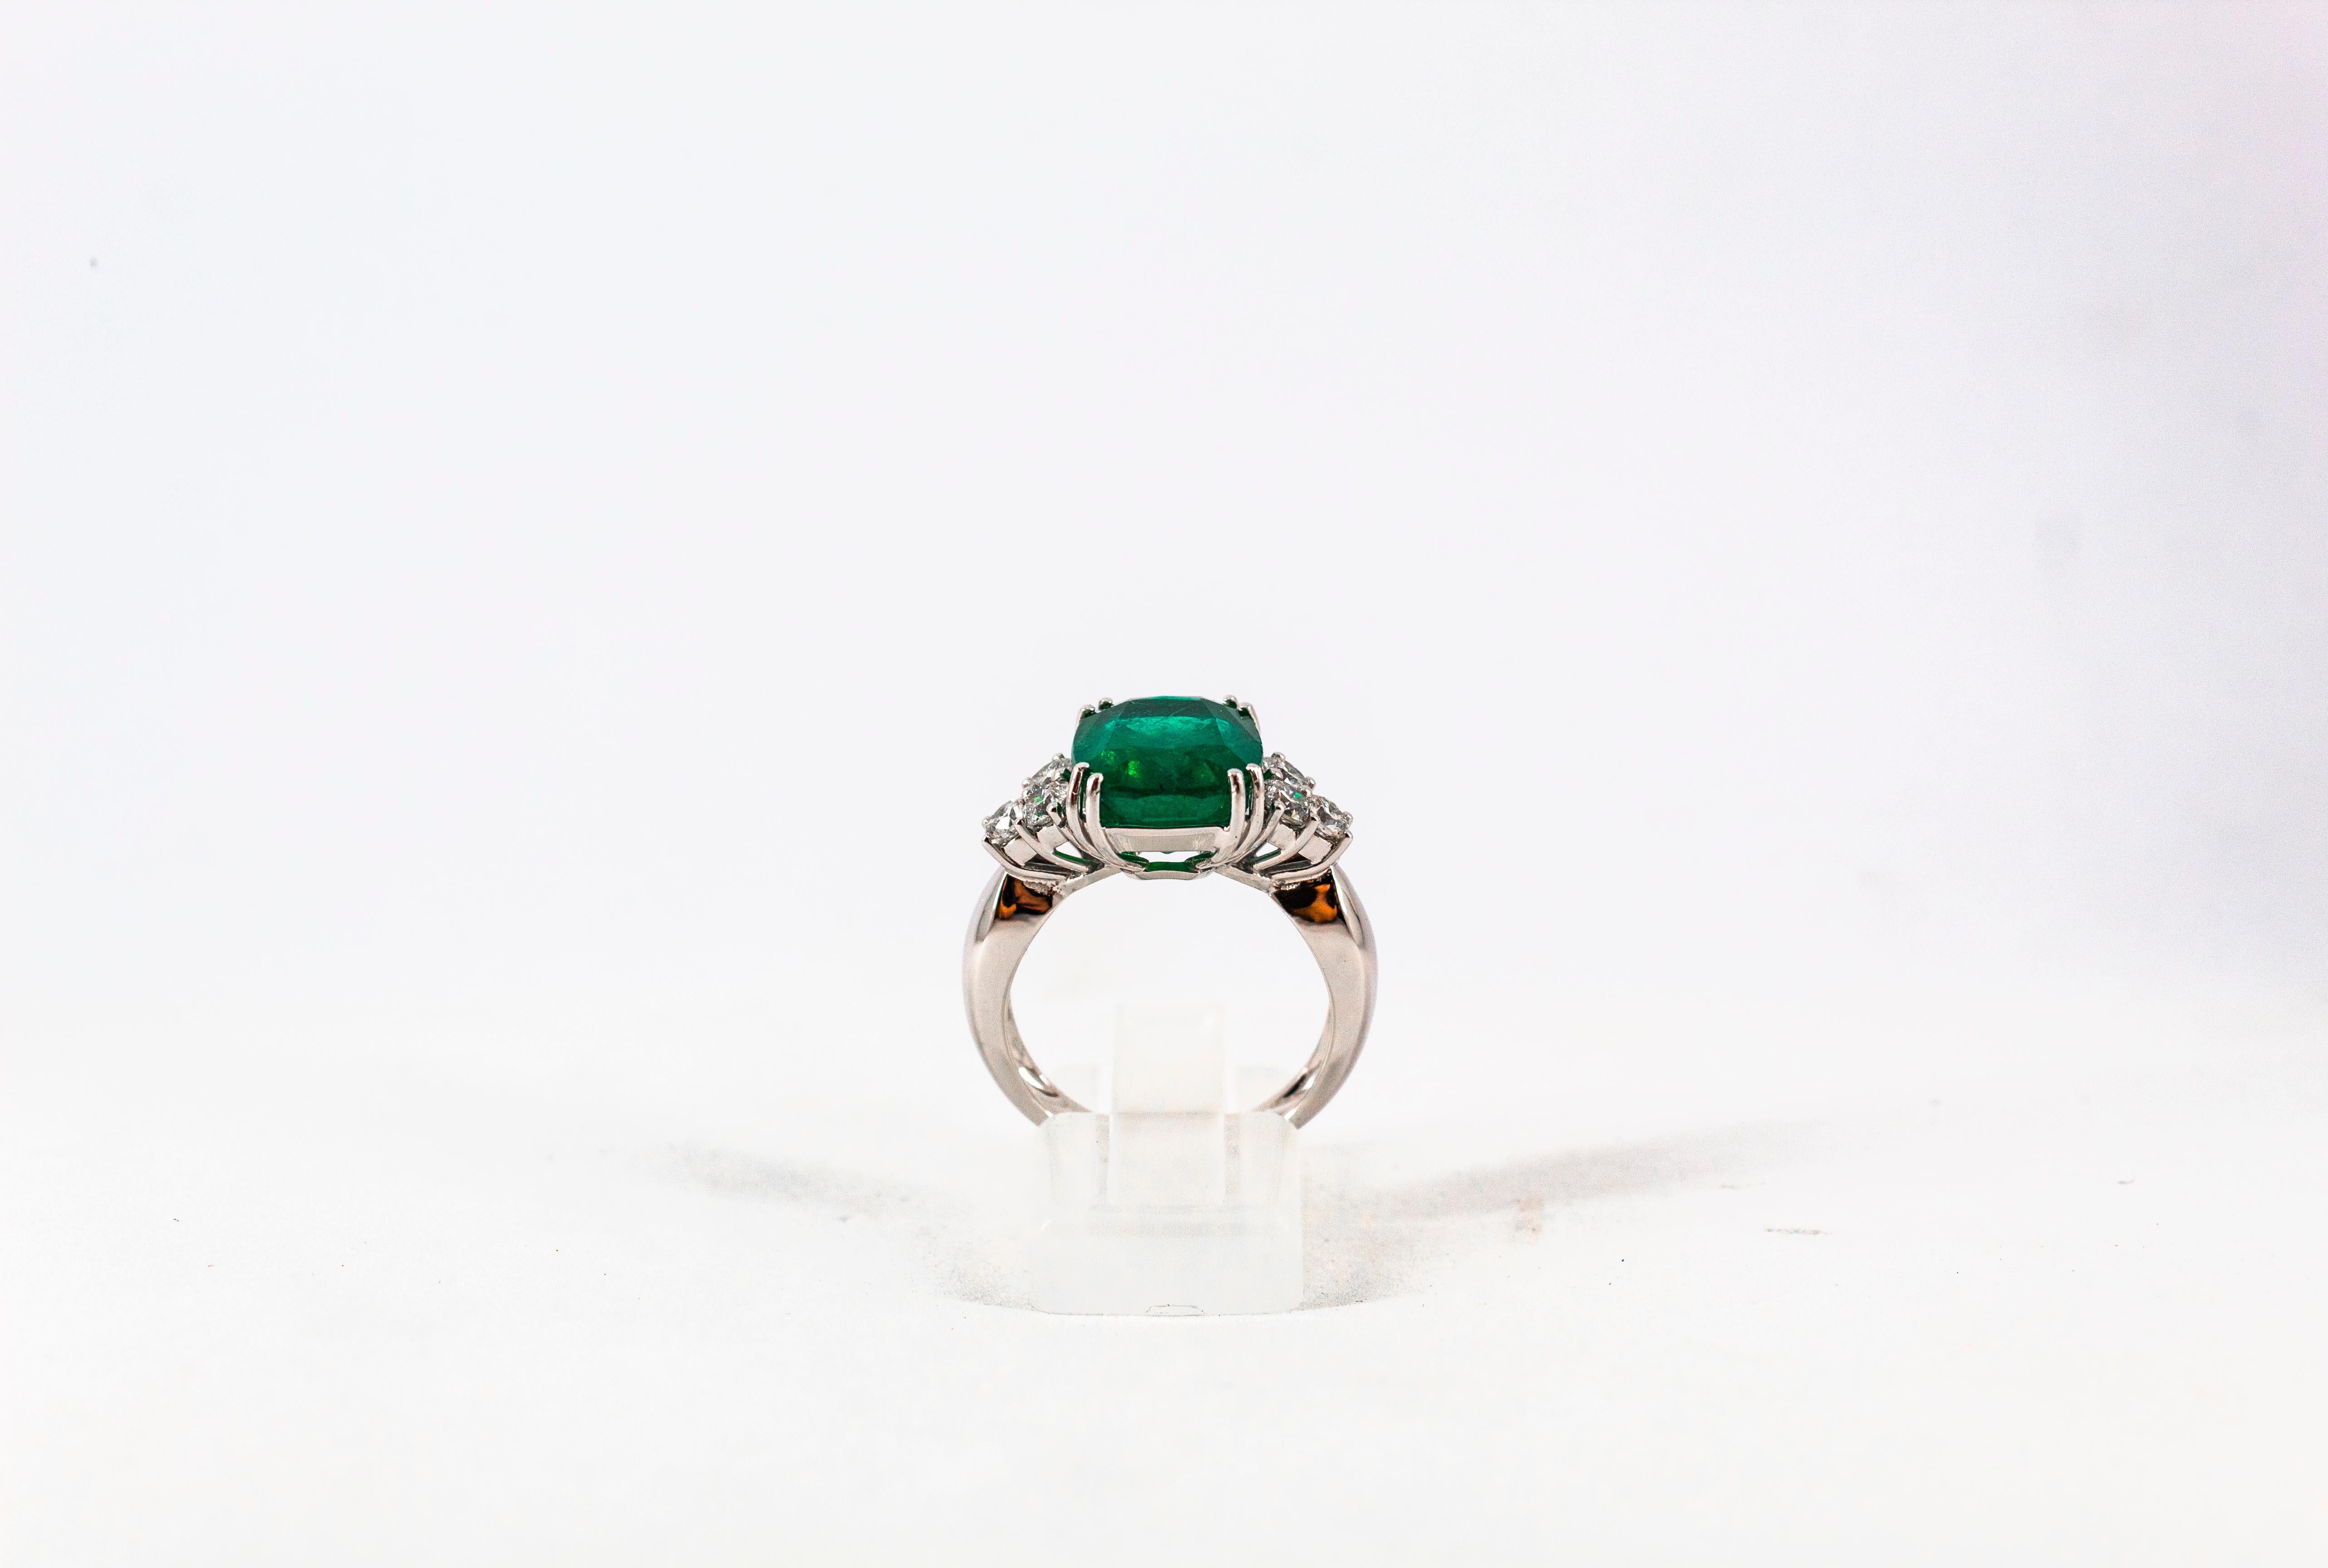 This Ring is made of 18K White Gold.
This Ring has 0.74 Carats of White Modern Round Cut Diamonds. Color: H-G Clarity: VVS1
This Ring has a 5.73 Carats Natural Zambia Cushion Cut Emerald.
This Ring is inspired by Art Deco.
Size ITA: 14.5 USA: